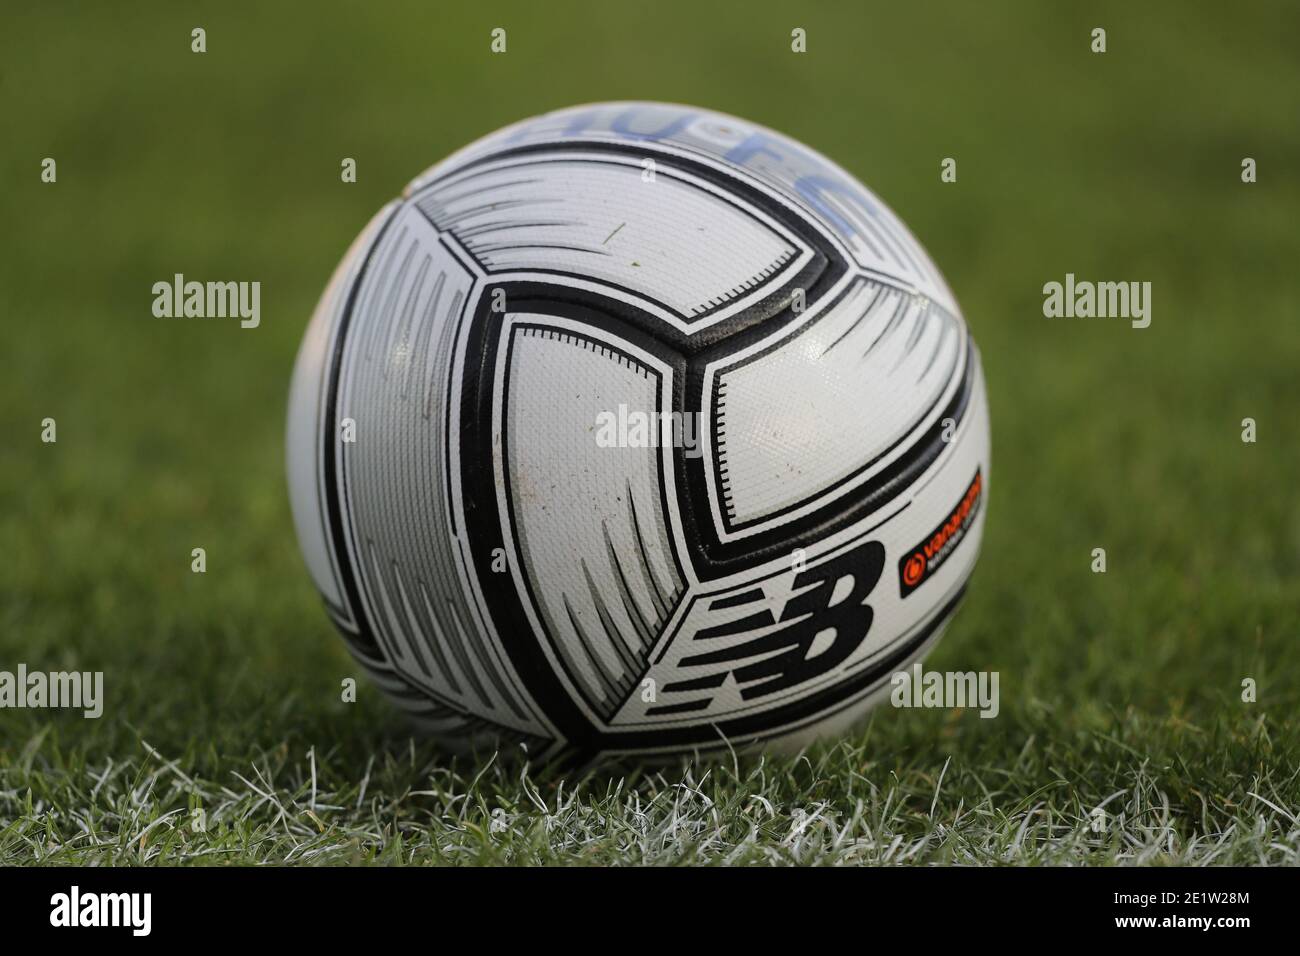 HARTLEPOOL, ENGLAND. JAM 9TH A general view of the New Balance match ball  used in the Vanarama National League match between Hartlepool United and  Wealdstone at Victoria Park, Hartlepool on Saturday 9th